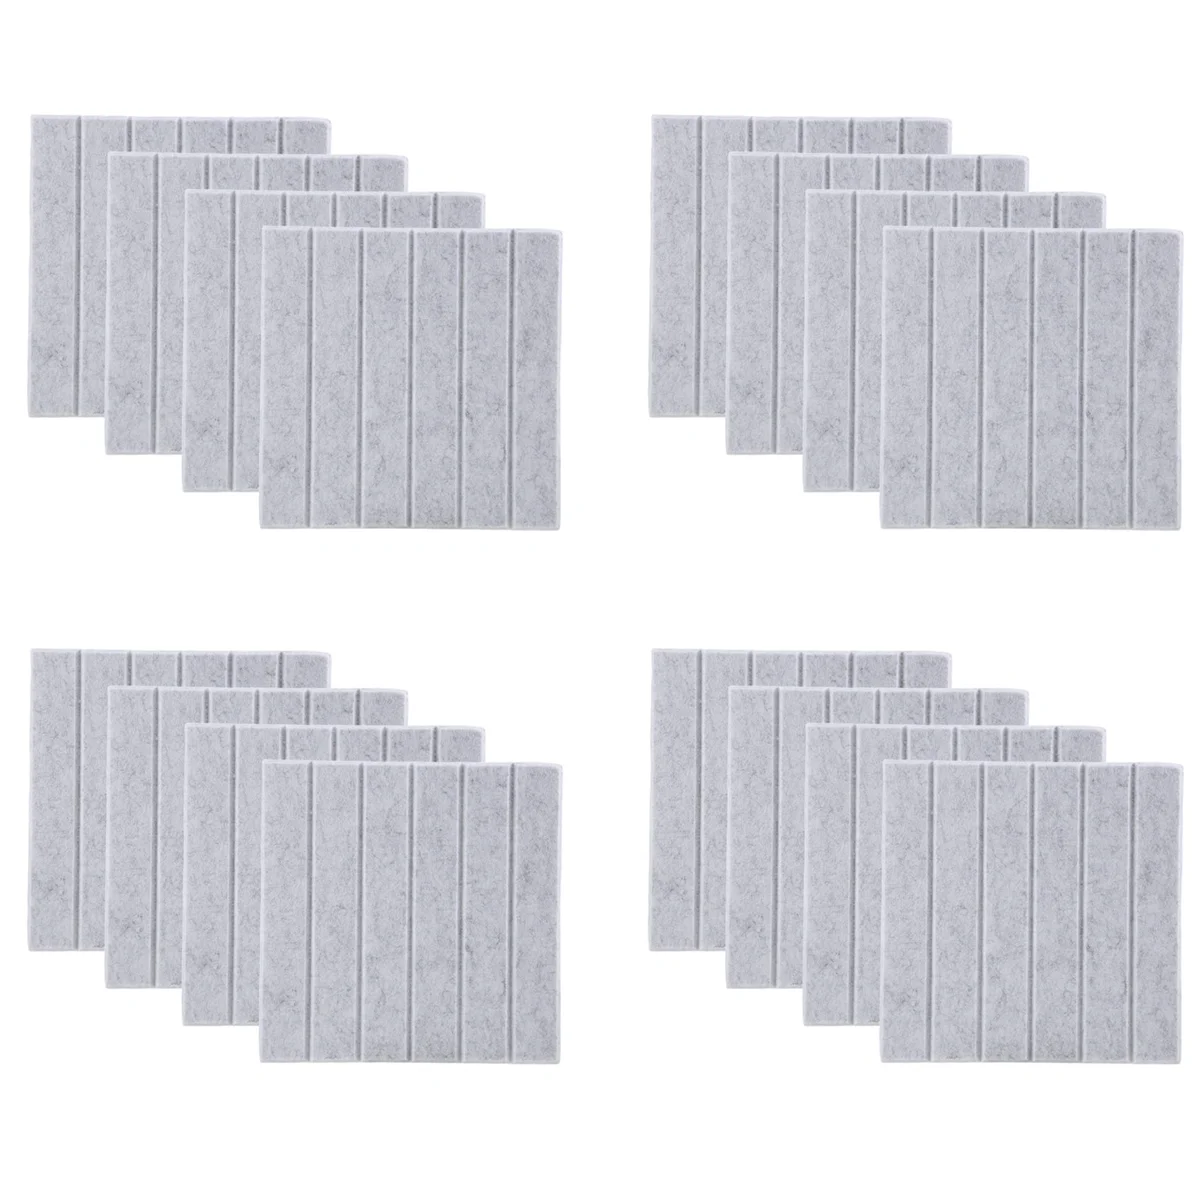 

12 Pcs Sound-Absorbing Panels Sound Insulation Pads,Echo Bass Isolation,Used for Wall Decoration and Acoustic Treatment